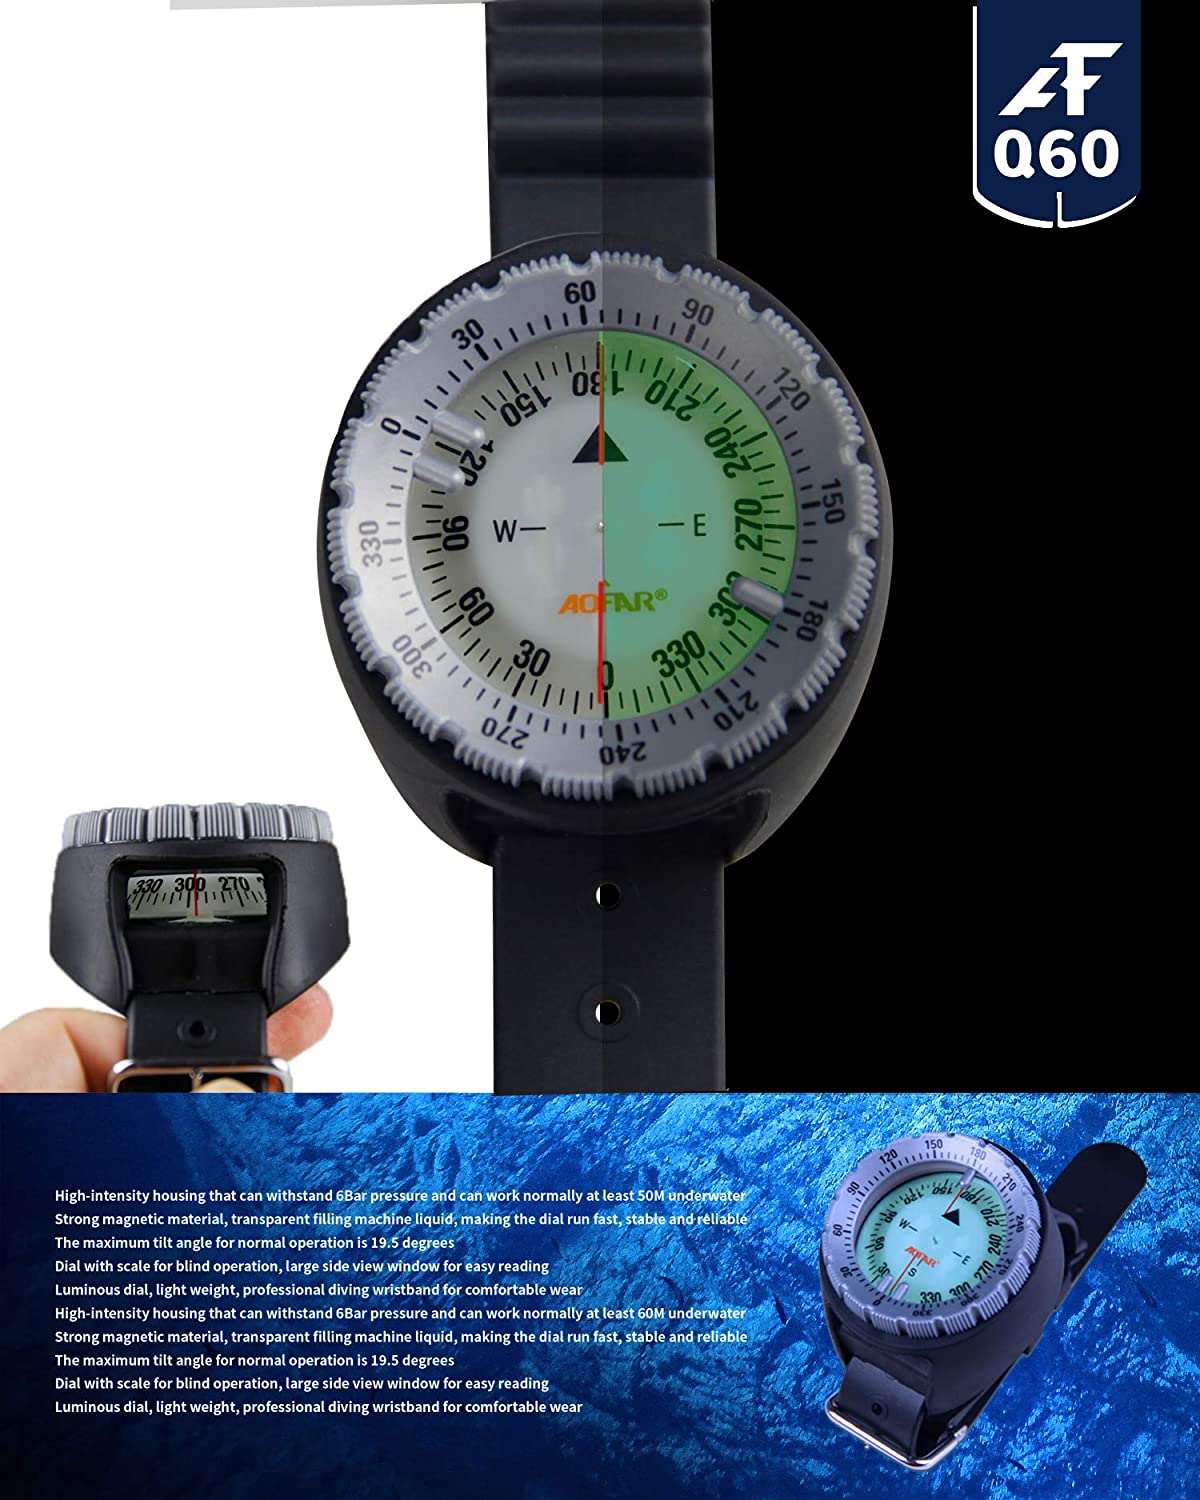 AOFAR Dive Compass AF-Q60 Waterproof, Durable, Compact. Wrist Strap Type Compass for Sailing, Diving, 11.8in Strap - Hatke